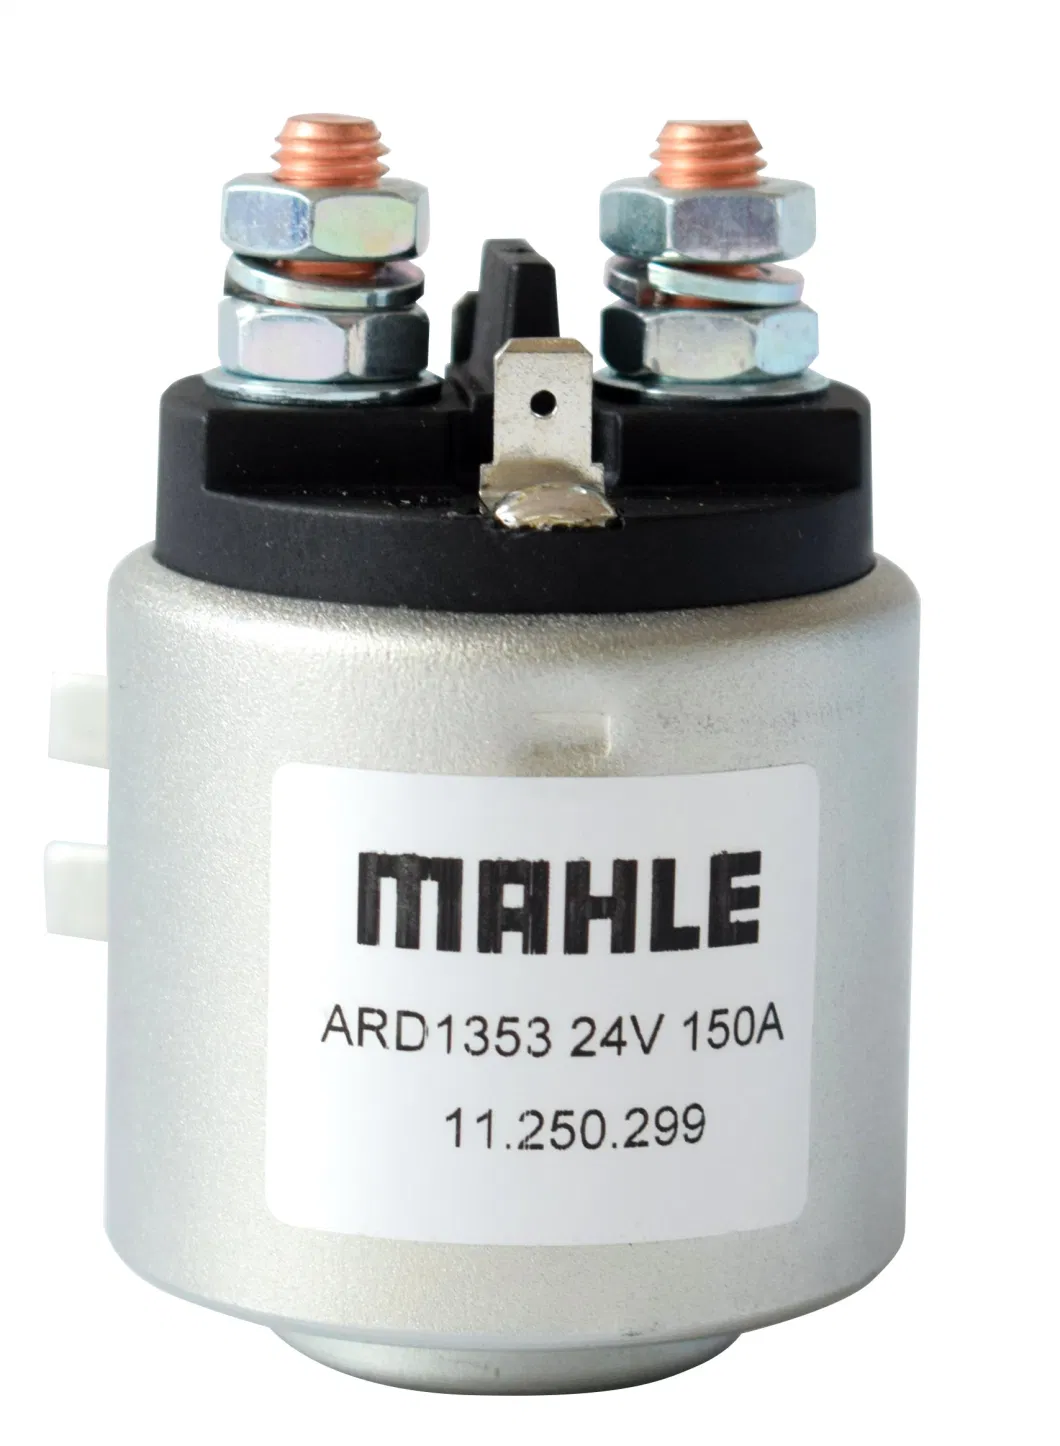 Forklift Parts Mahle 24V 150A Magnetic Contactor Ard1353 Relay for Electric Stacker/Forklift/Golf Cart